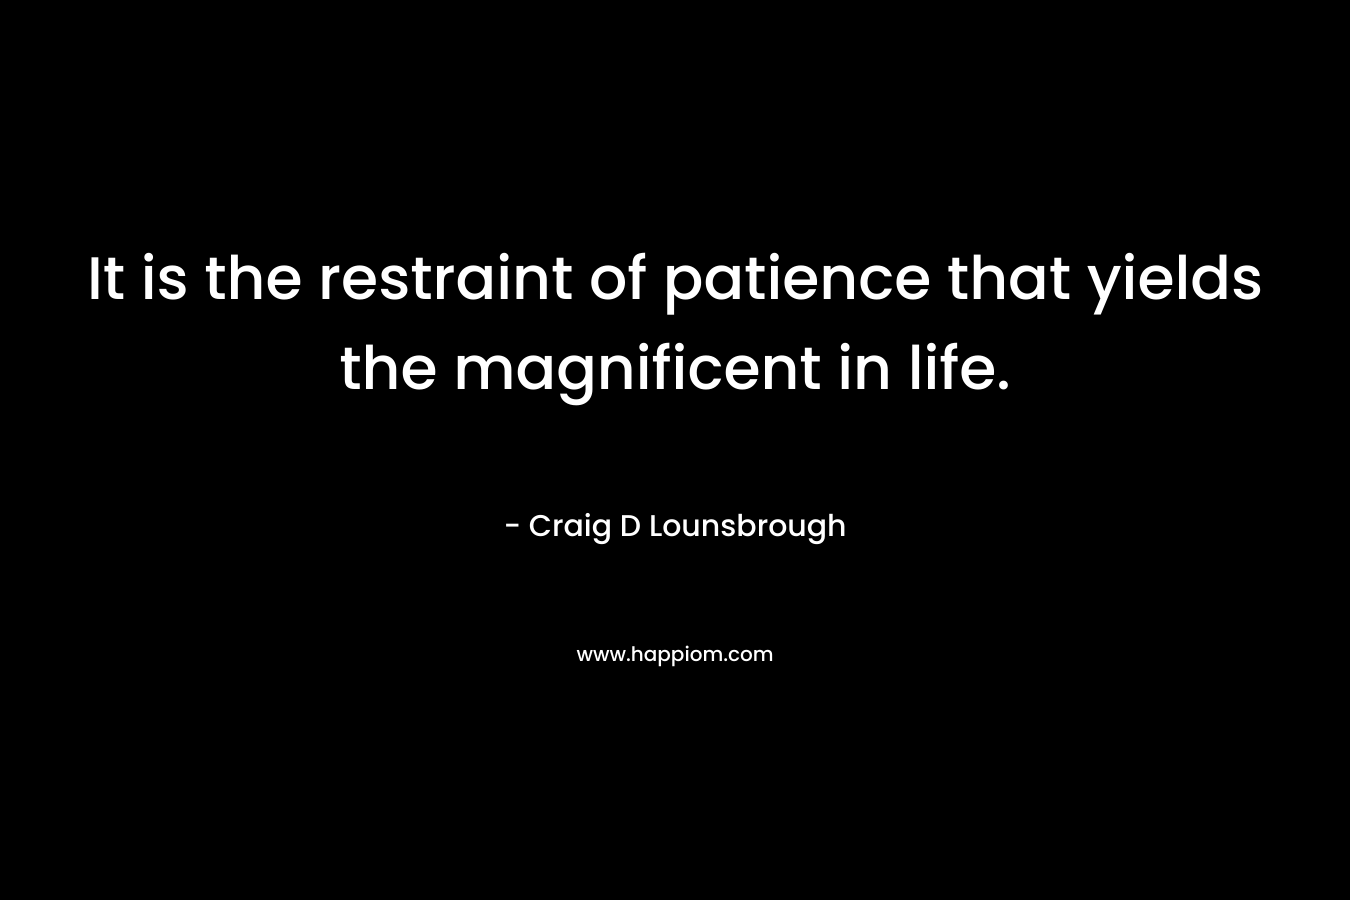 It is the restraint of patience that yields the magnificent in life. – Craig D Lounsbrough